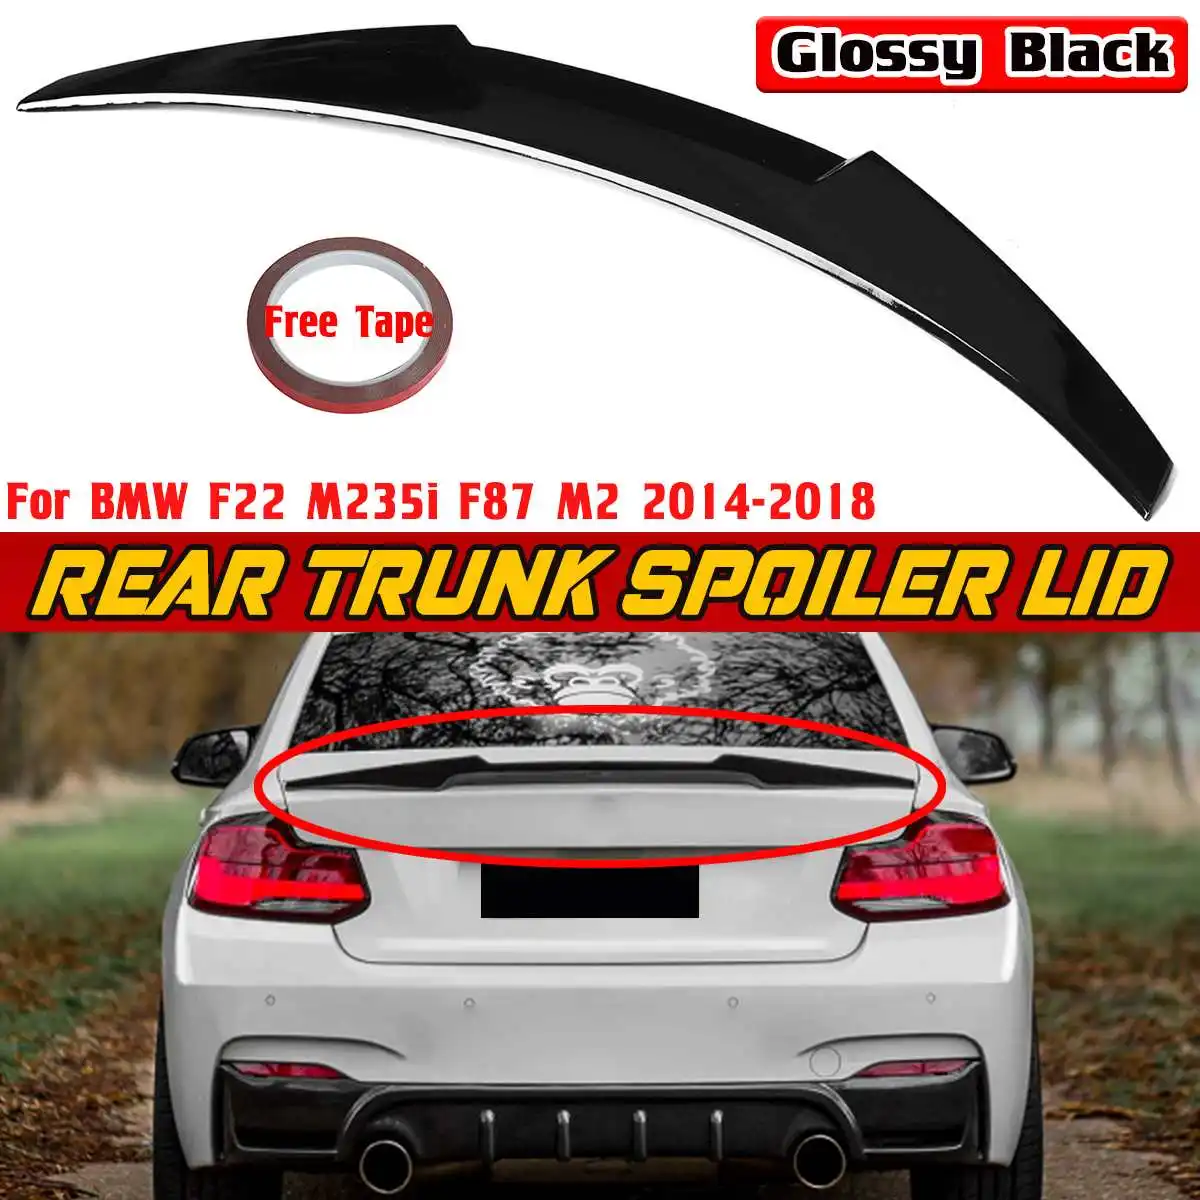 

Carbon Fiber Look/Black ABS Car Rear Trunk Spoiler Wing Lip Wing Spoiler Extension For BMW F22 M235i F87 M2 2014-2018 M4 Style